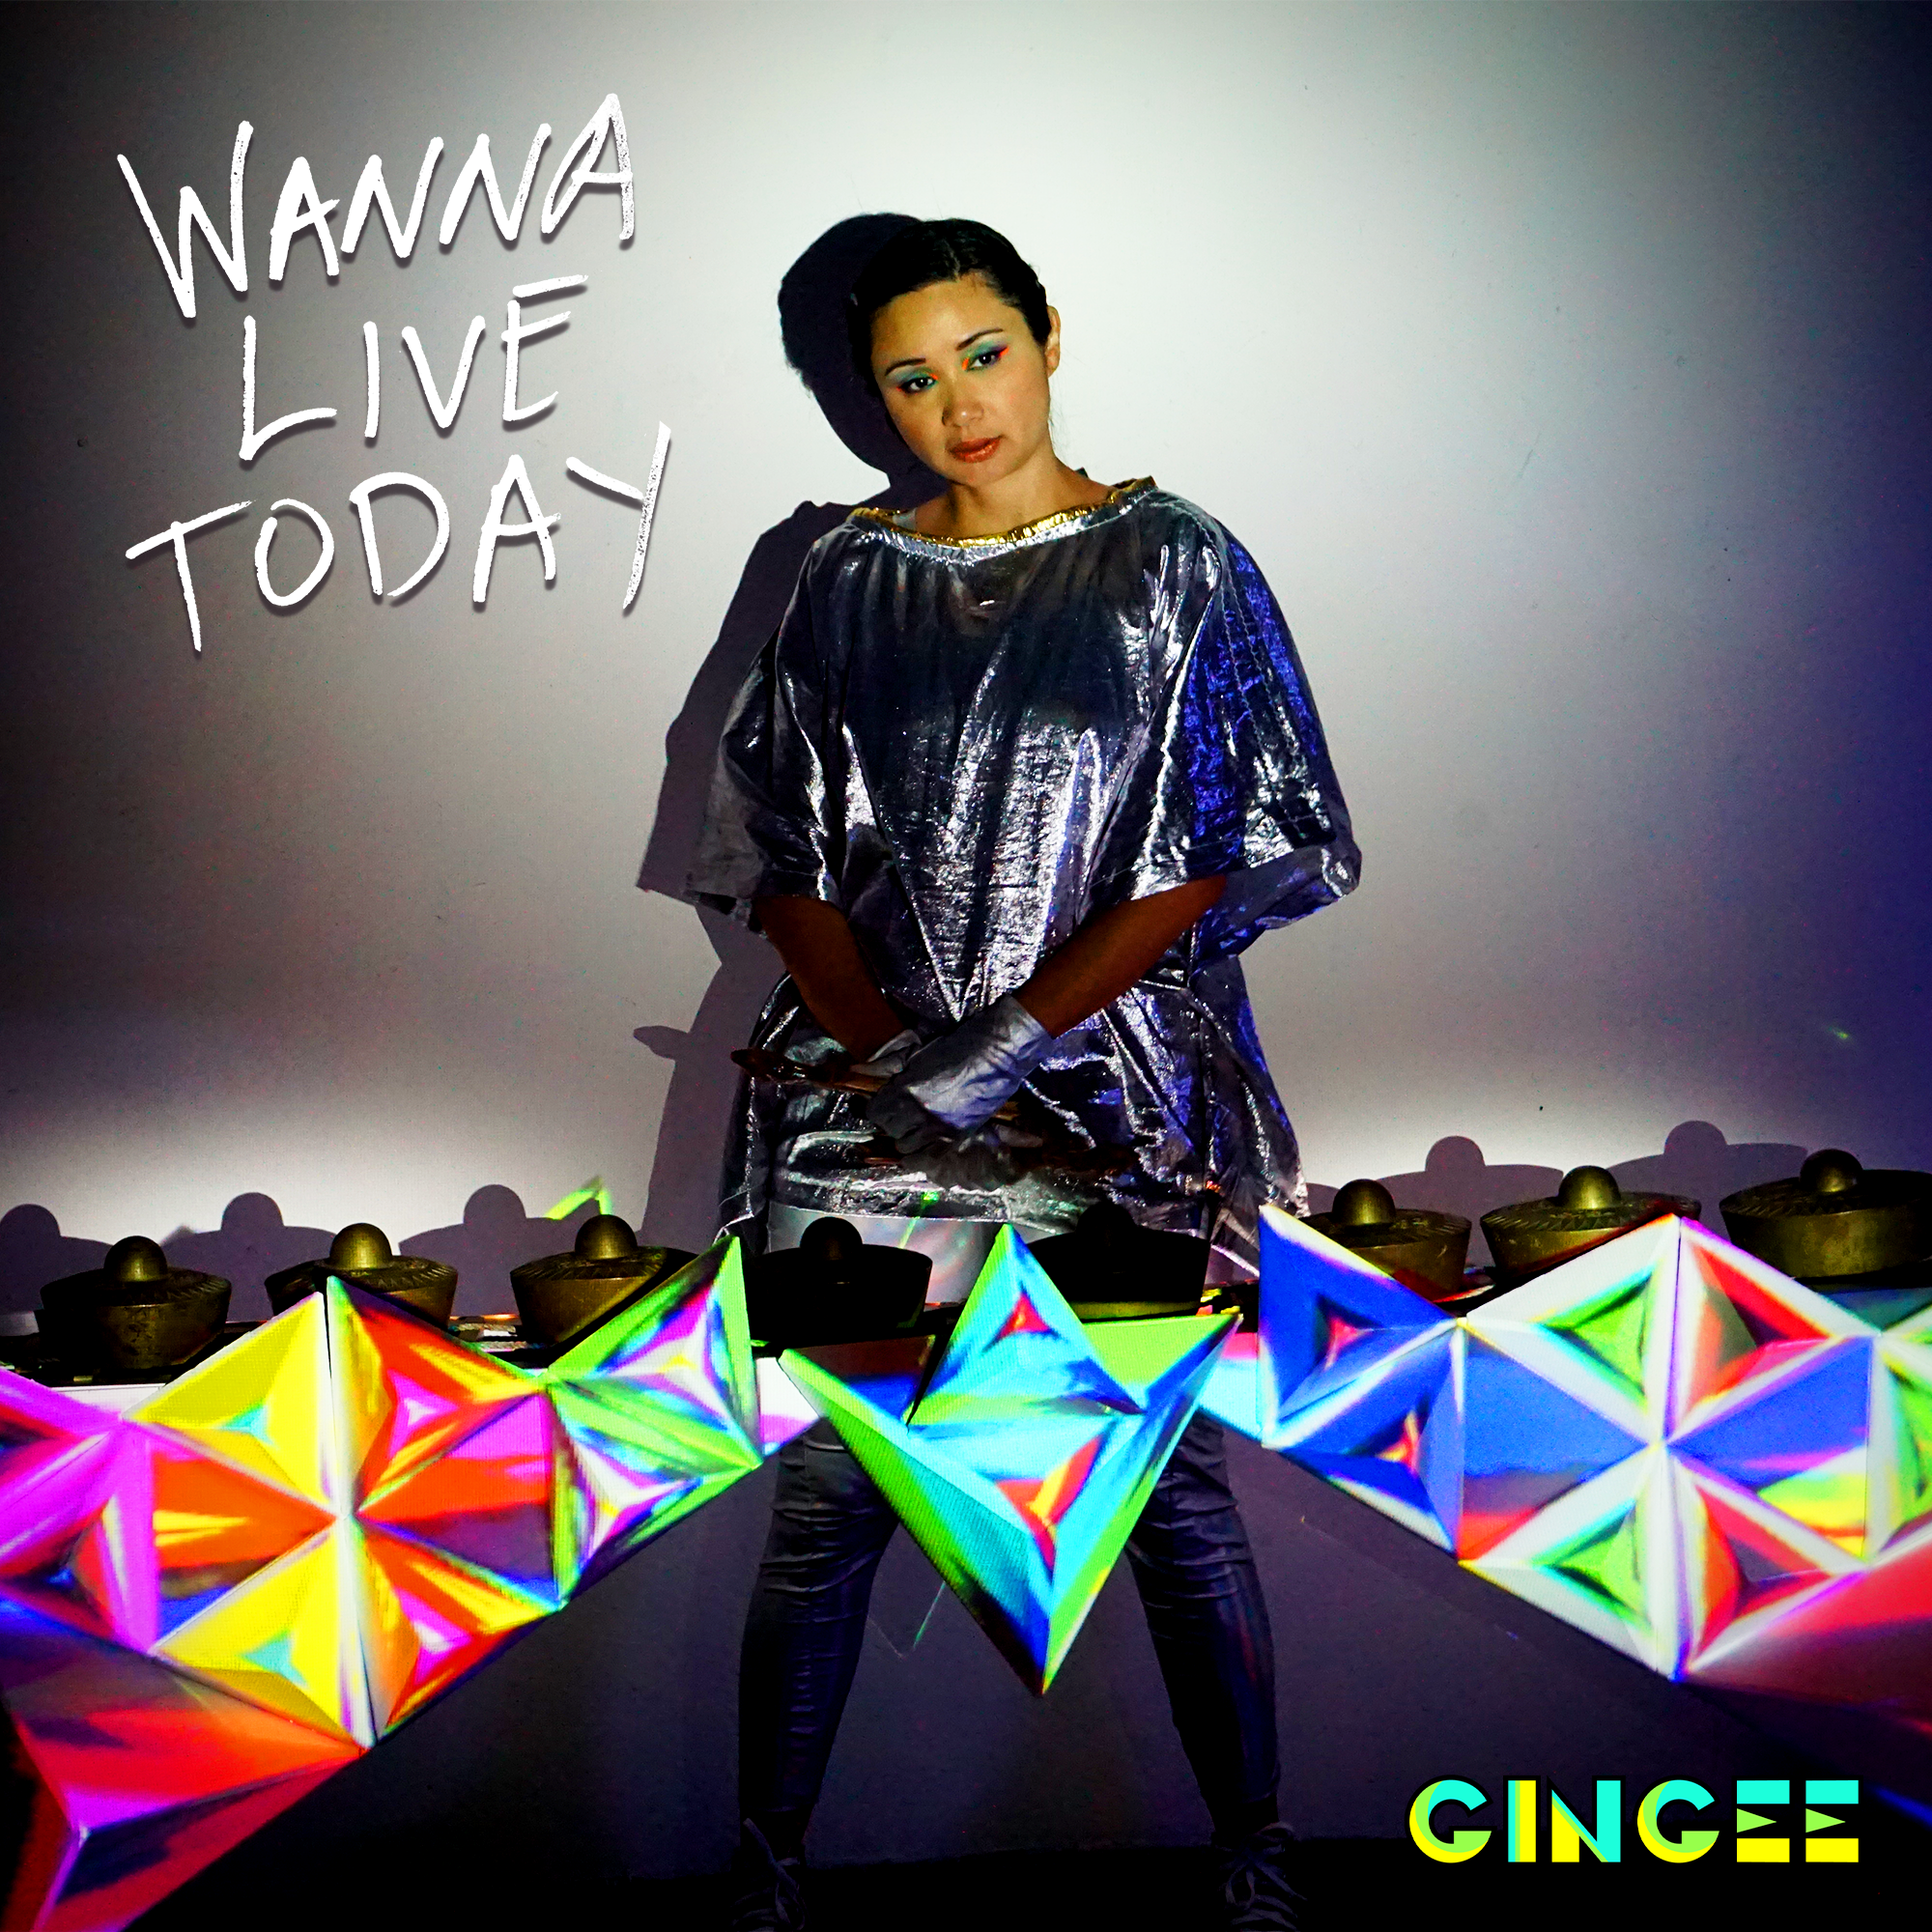 Wanna Live Today - Gingee